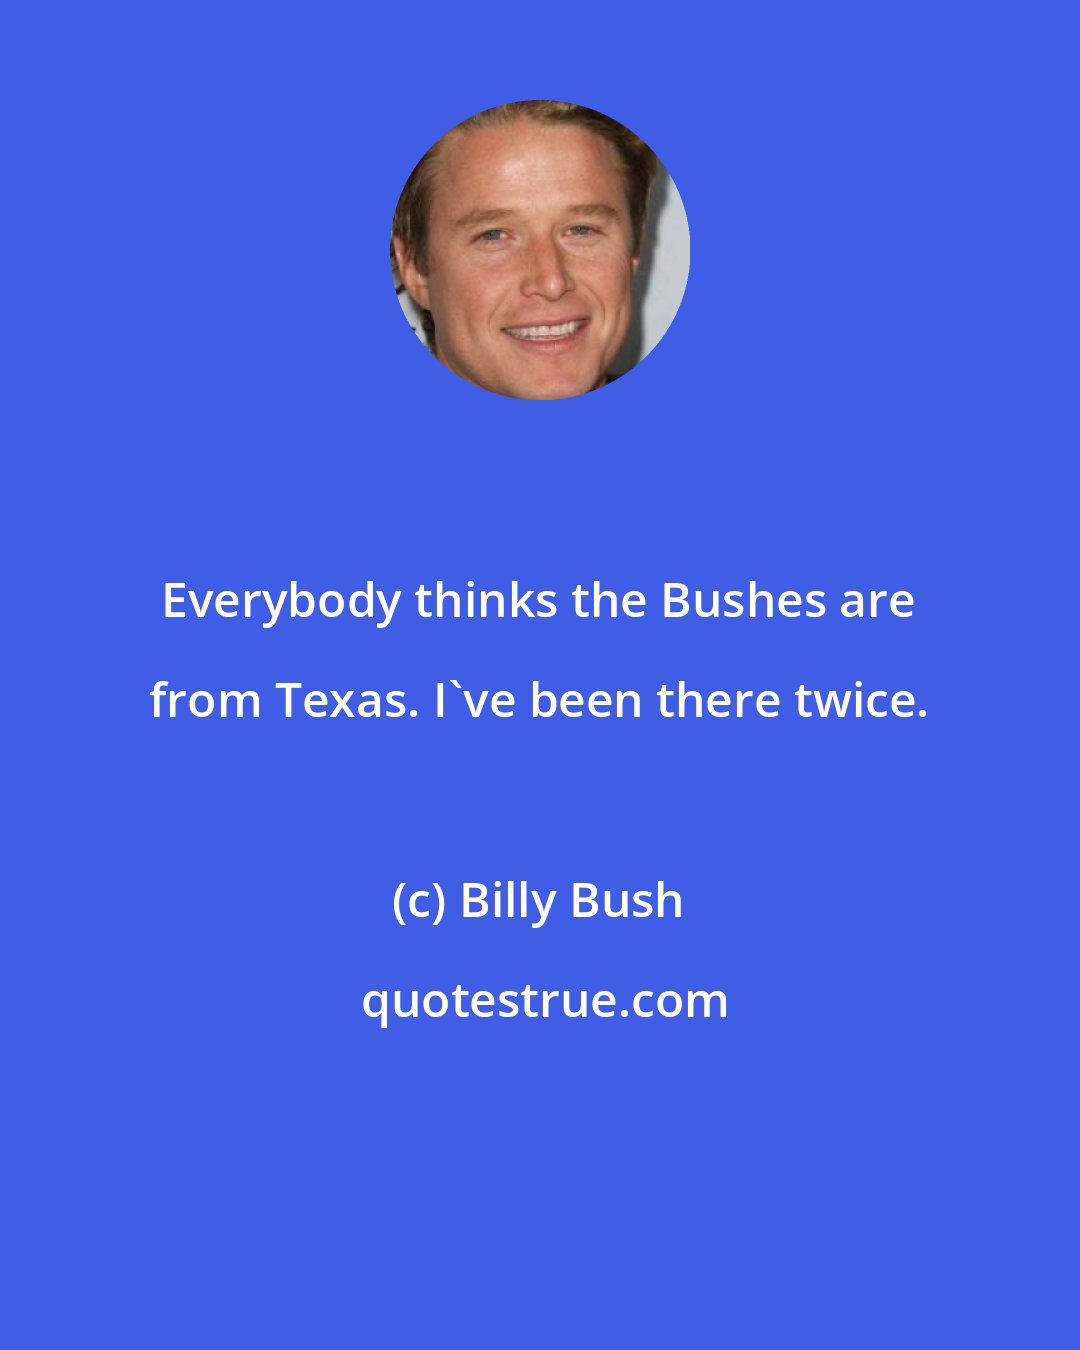 Billy Bush: Everybody thinks the Bushes are from Texas. I've been there twice.